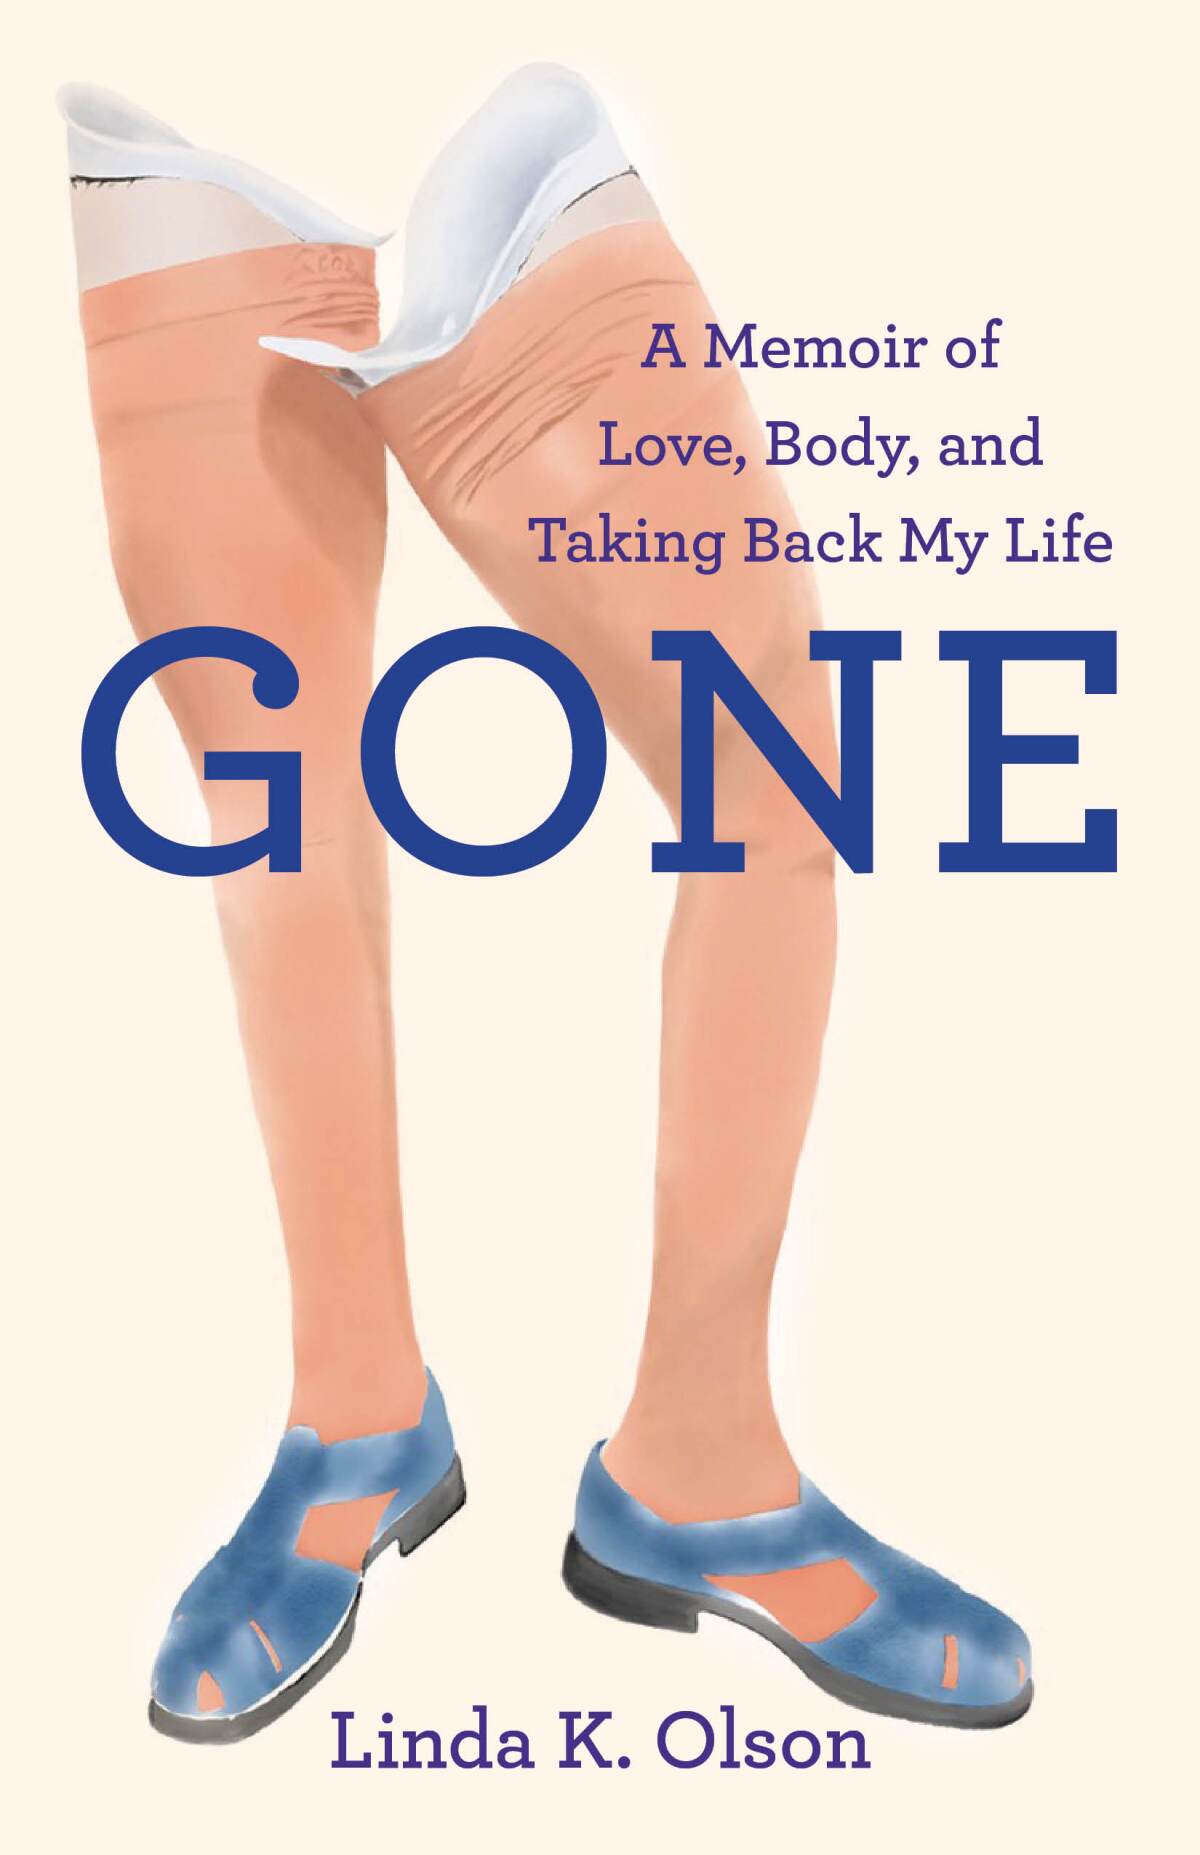 Linda Olson released her first book, “Gone: A Memoir of Love, Body and Taking Back My Life.”